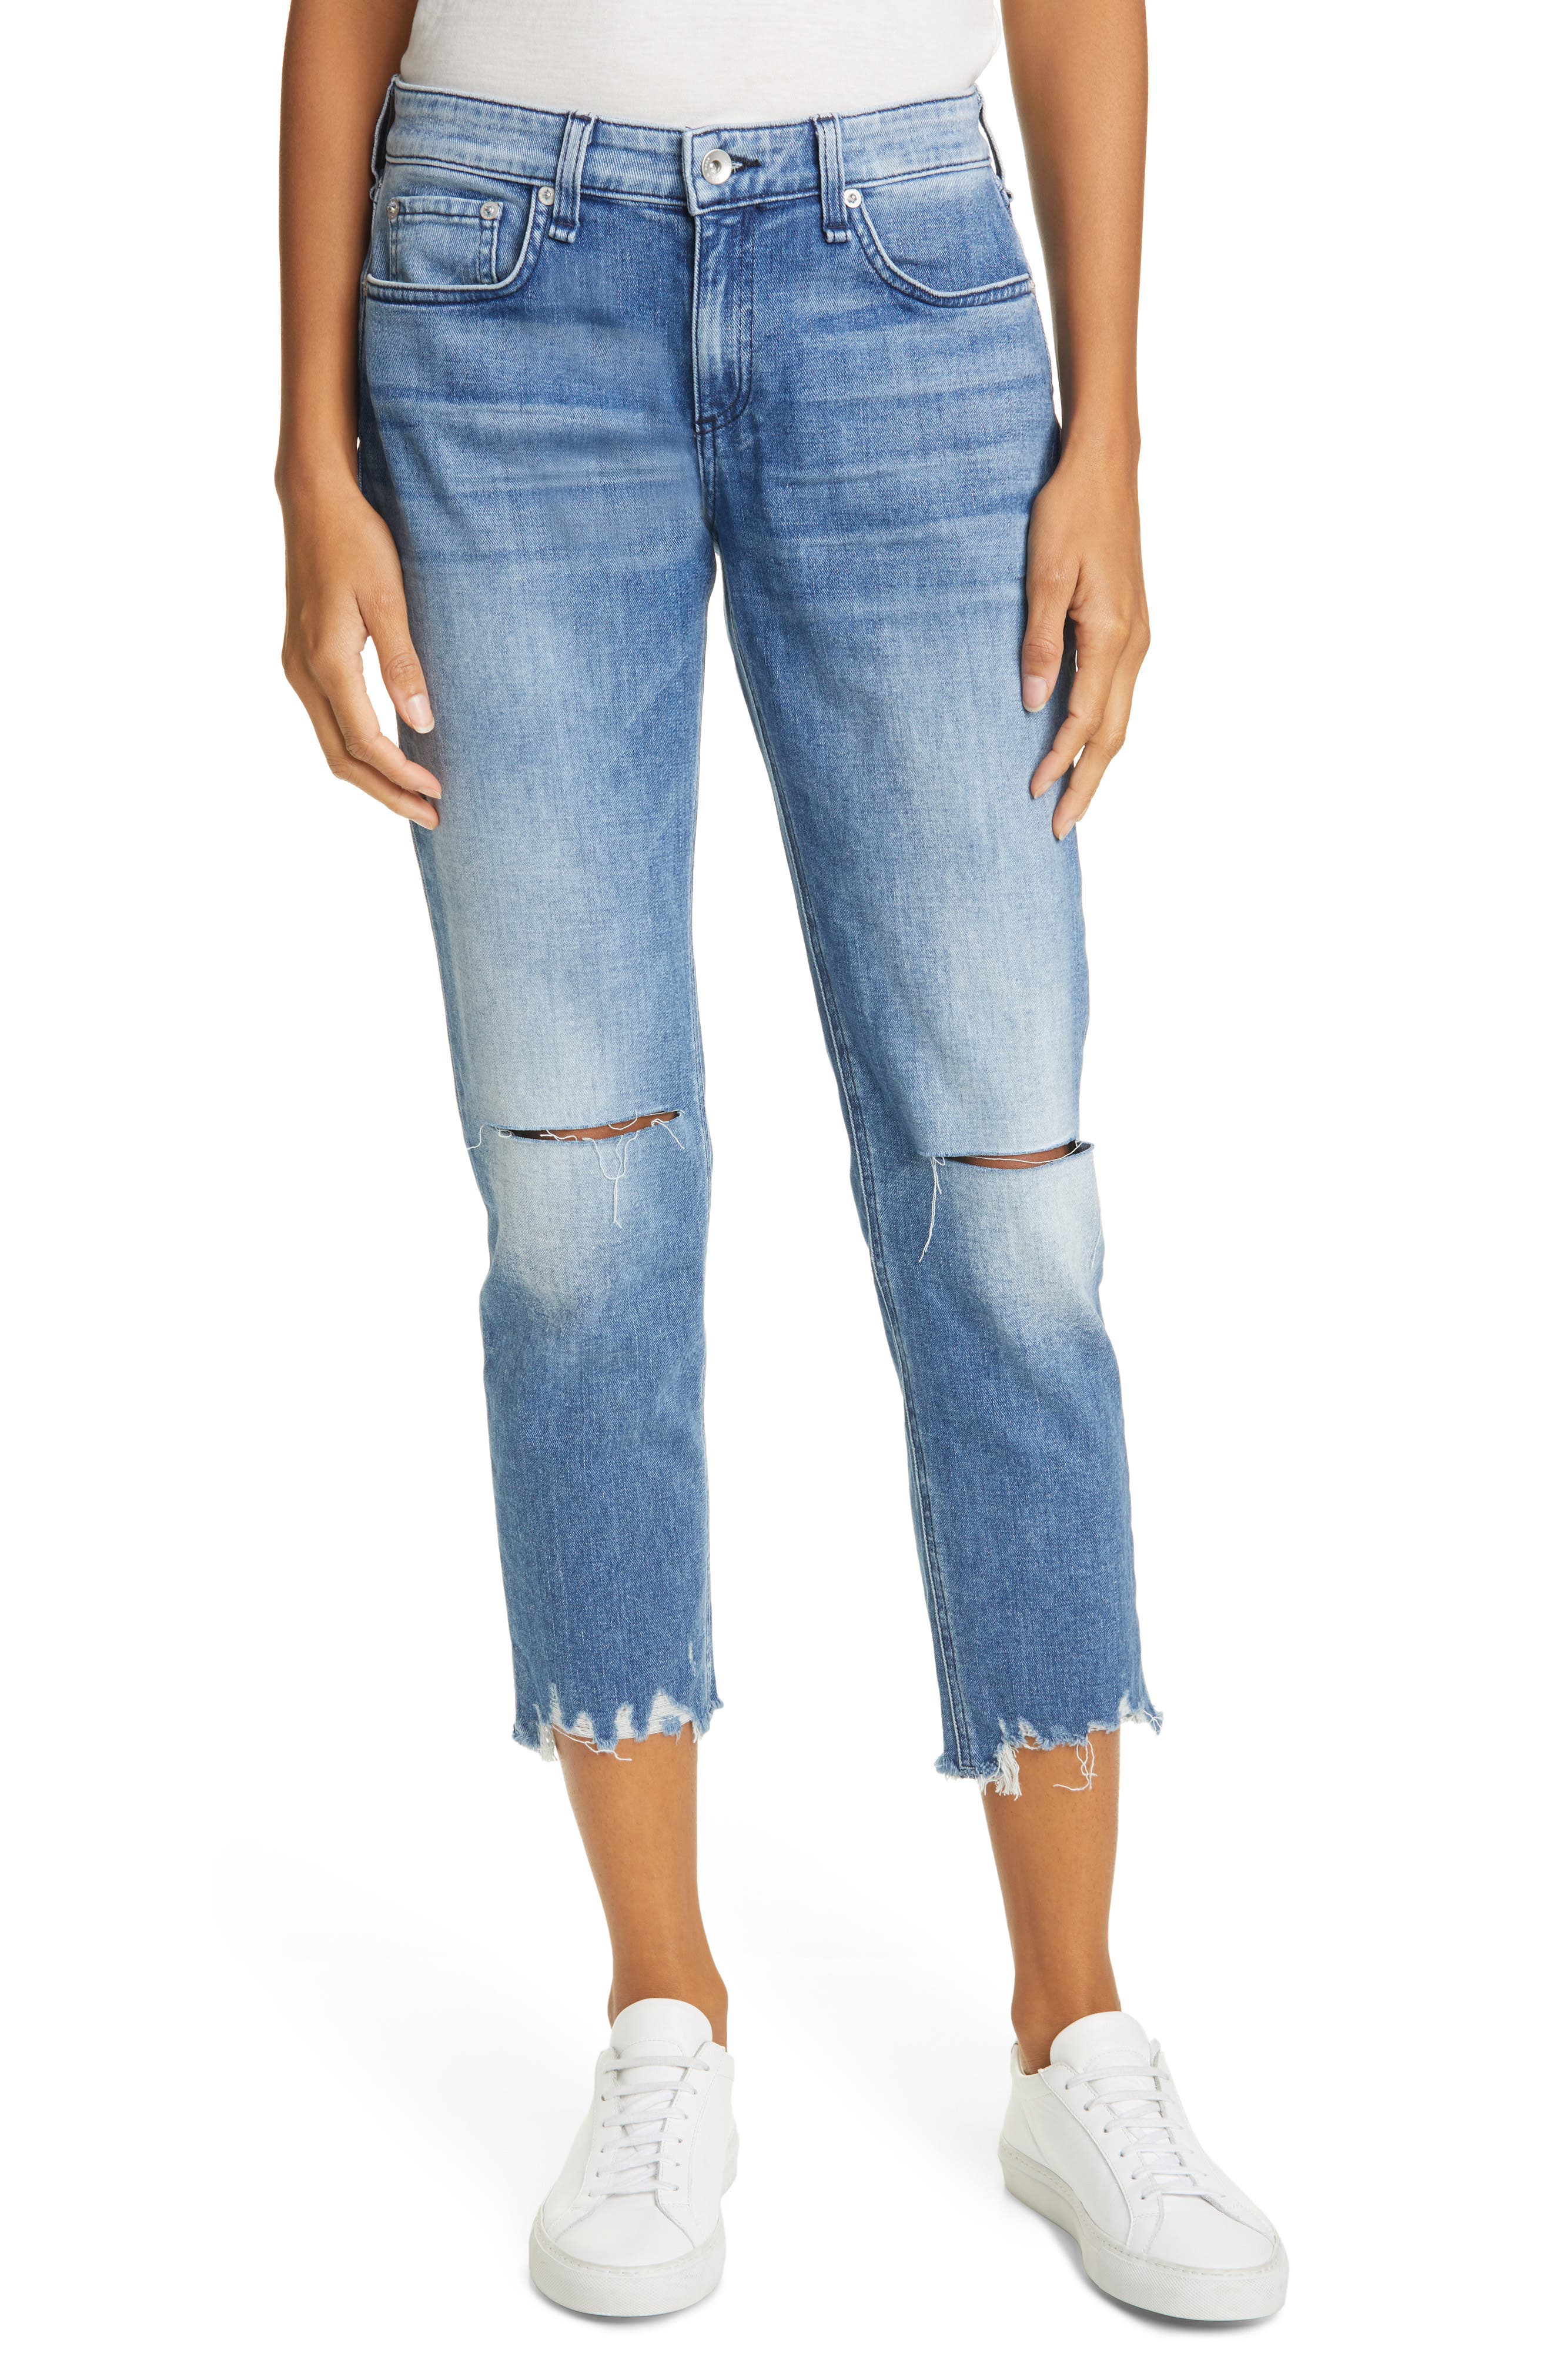 women's low rise distressed jeans